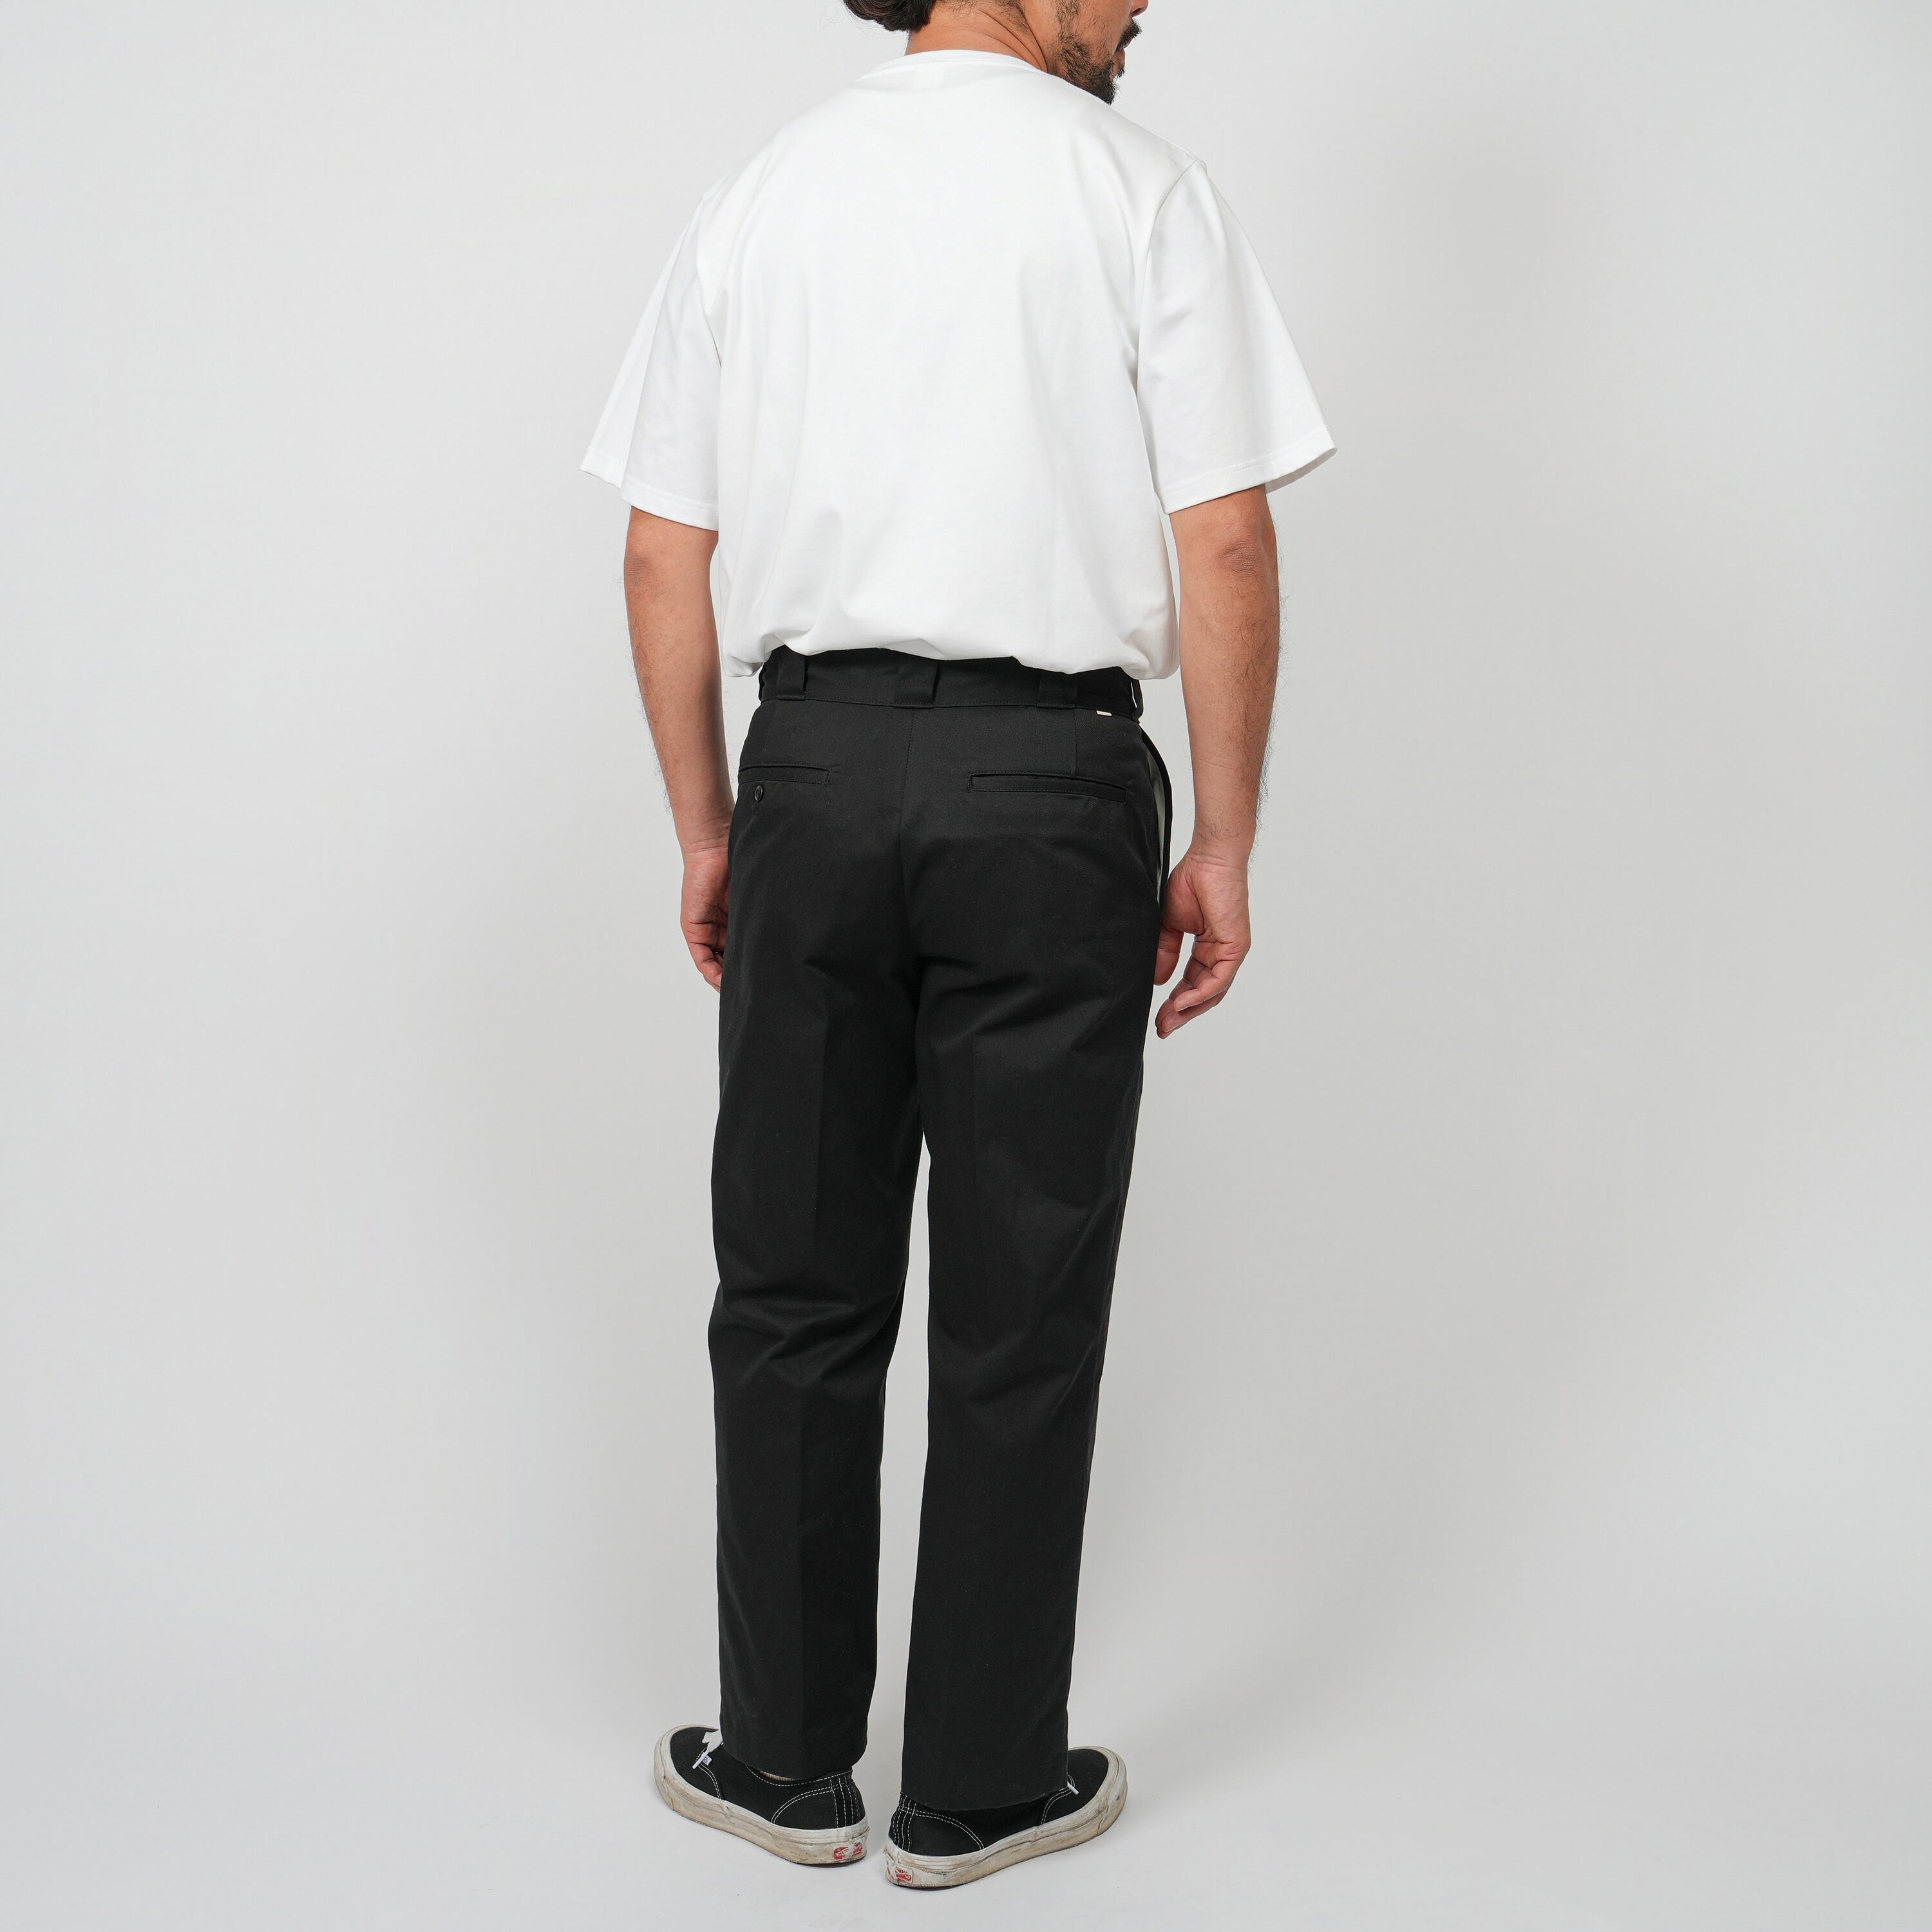 Dickies Pants: Women's FP321 DN Dark Navy Relaxed Fit Cotton